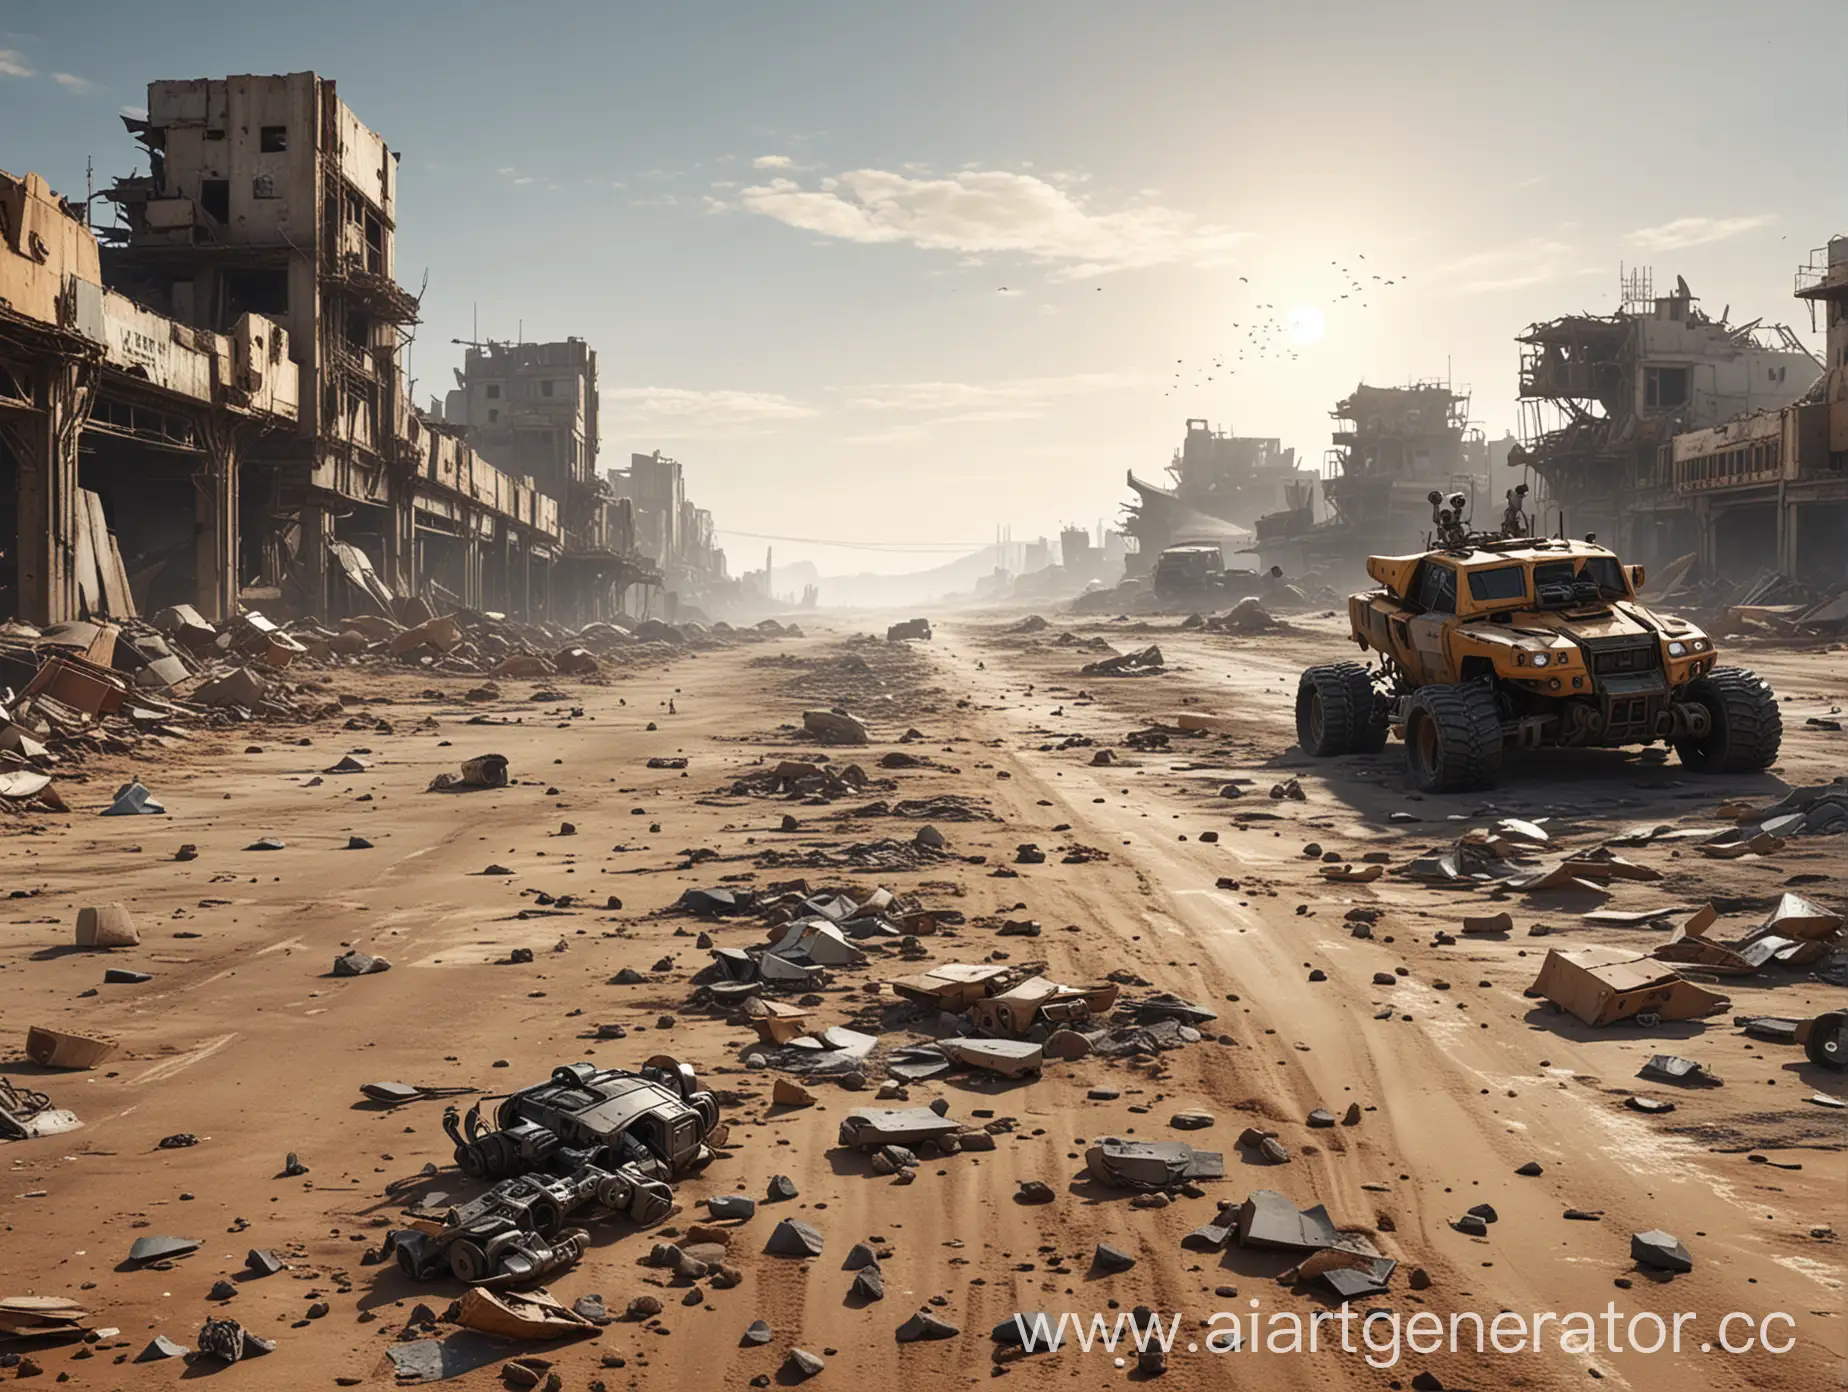 Deserted-Road-Amidst-Ruined-Buildings-in-a-PostApocalyptic-Robot-Wasteland